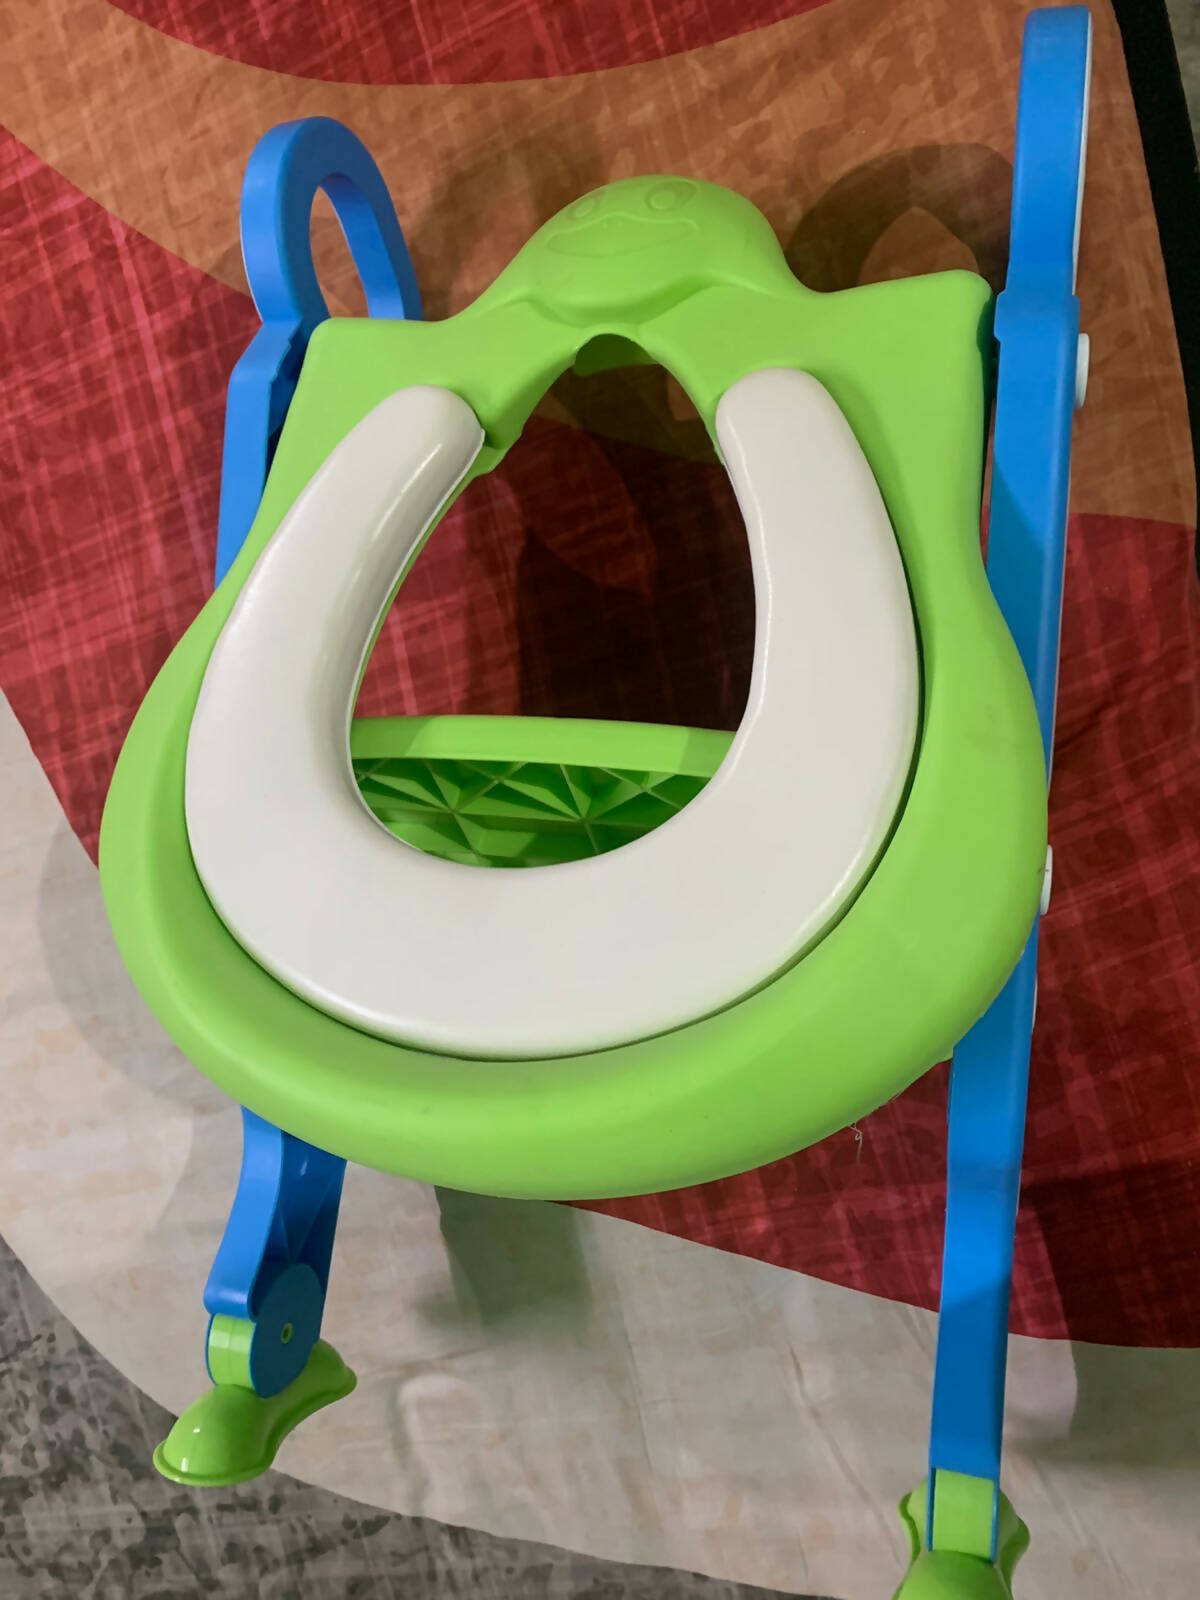 SUNBABY Foldable Potty-Trainer Seat with Ladder Non-Slip Steps